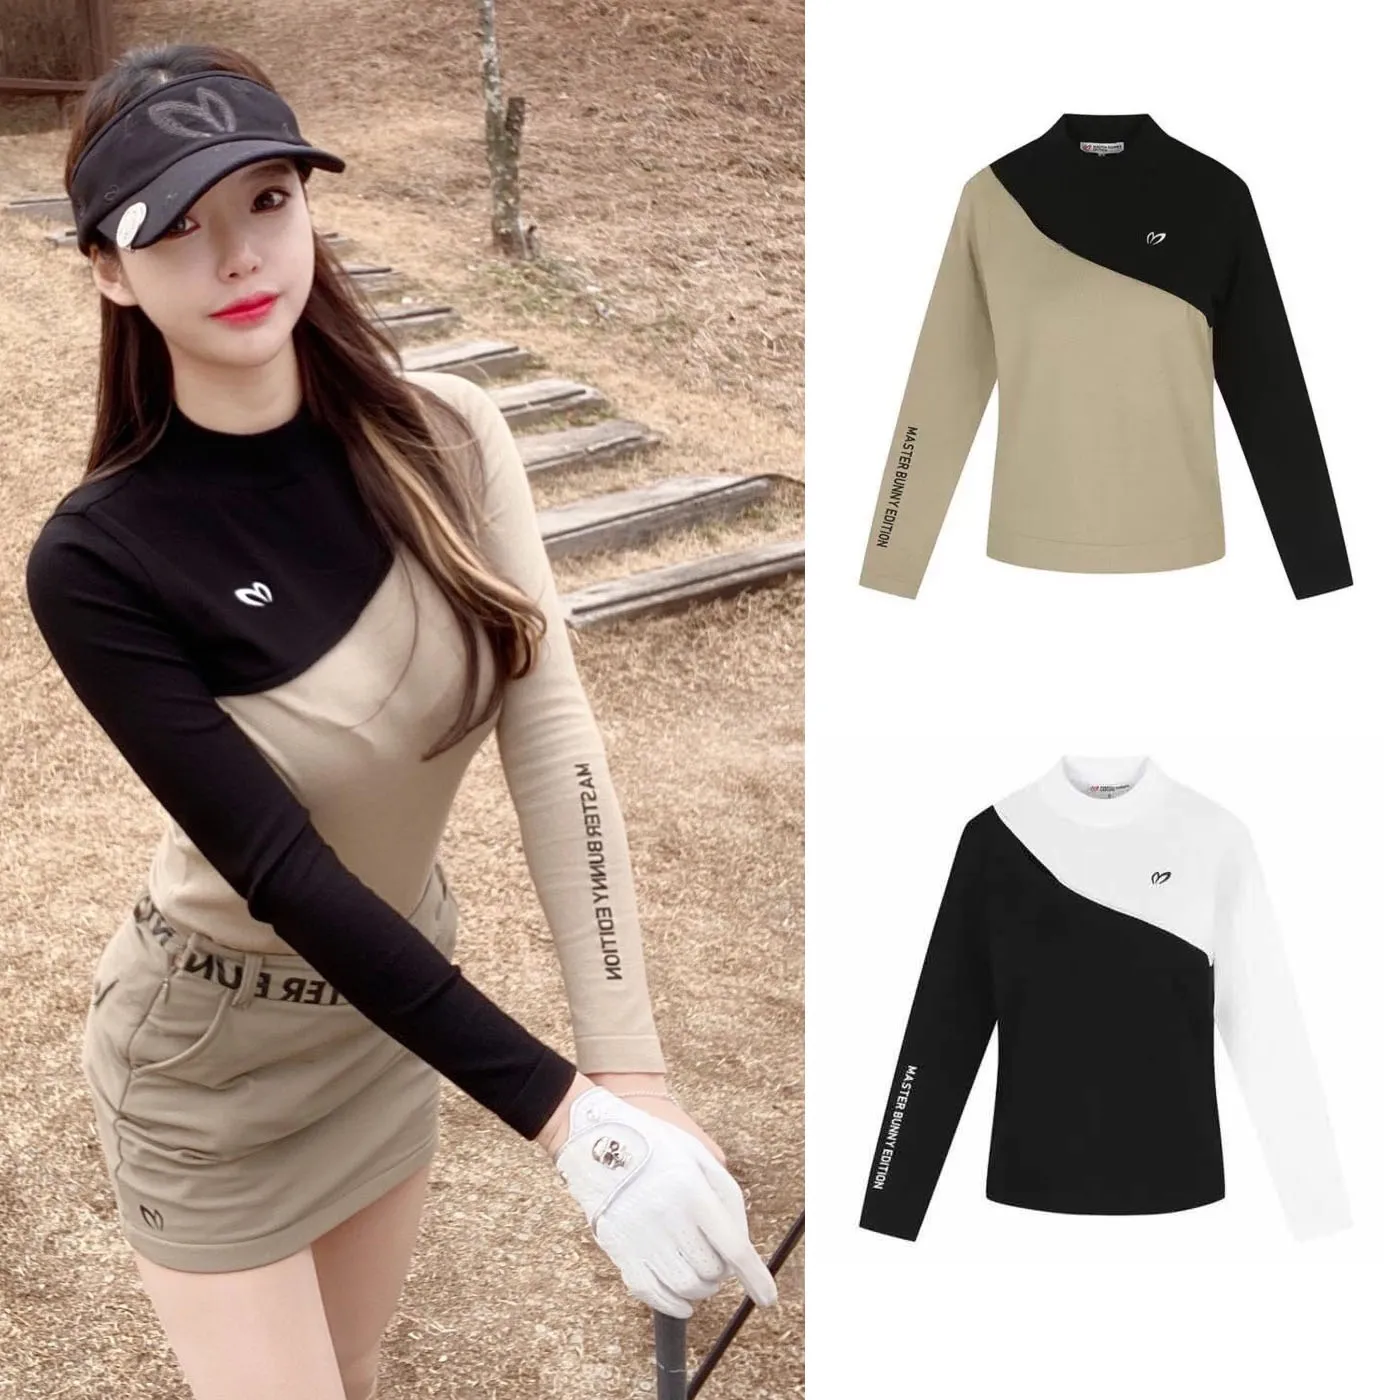 

PG Women's Golf Knitted Long Sleeved Shirt Autumn 2021 New MASTER BUNNY Two Color Splicing Shirts Slim Fit Design